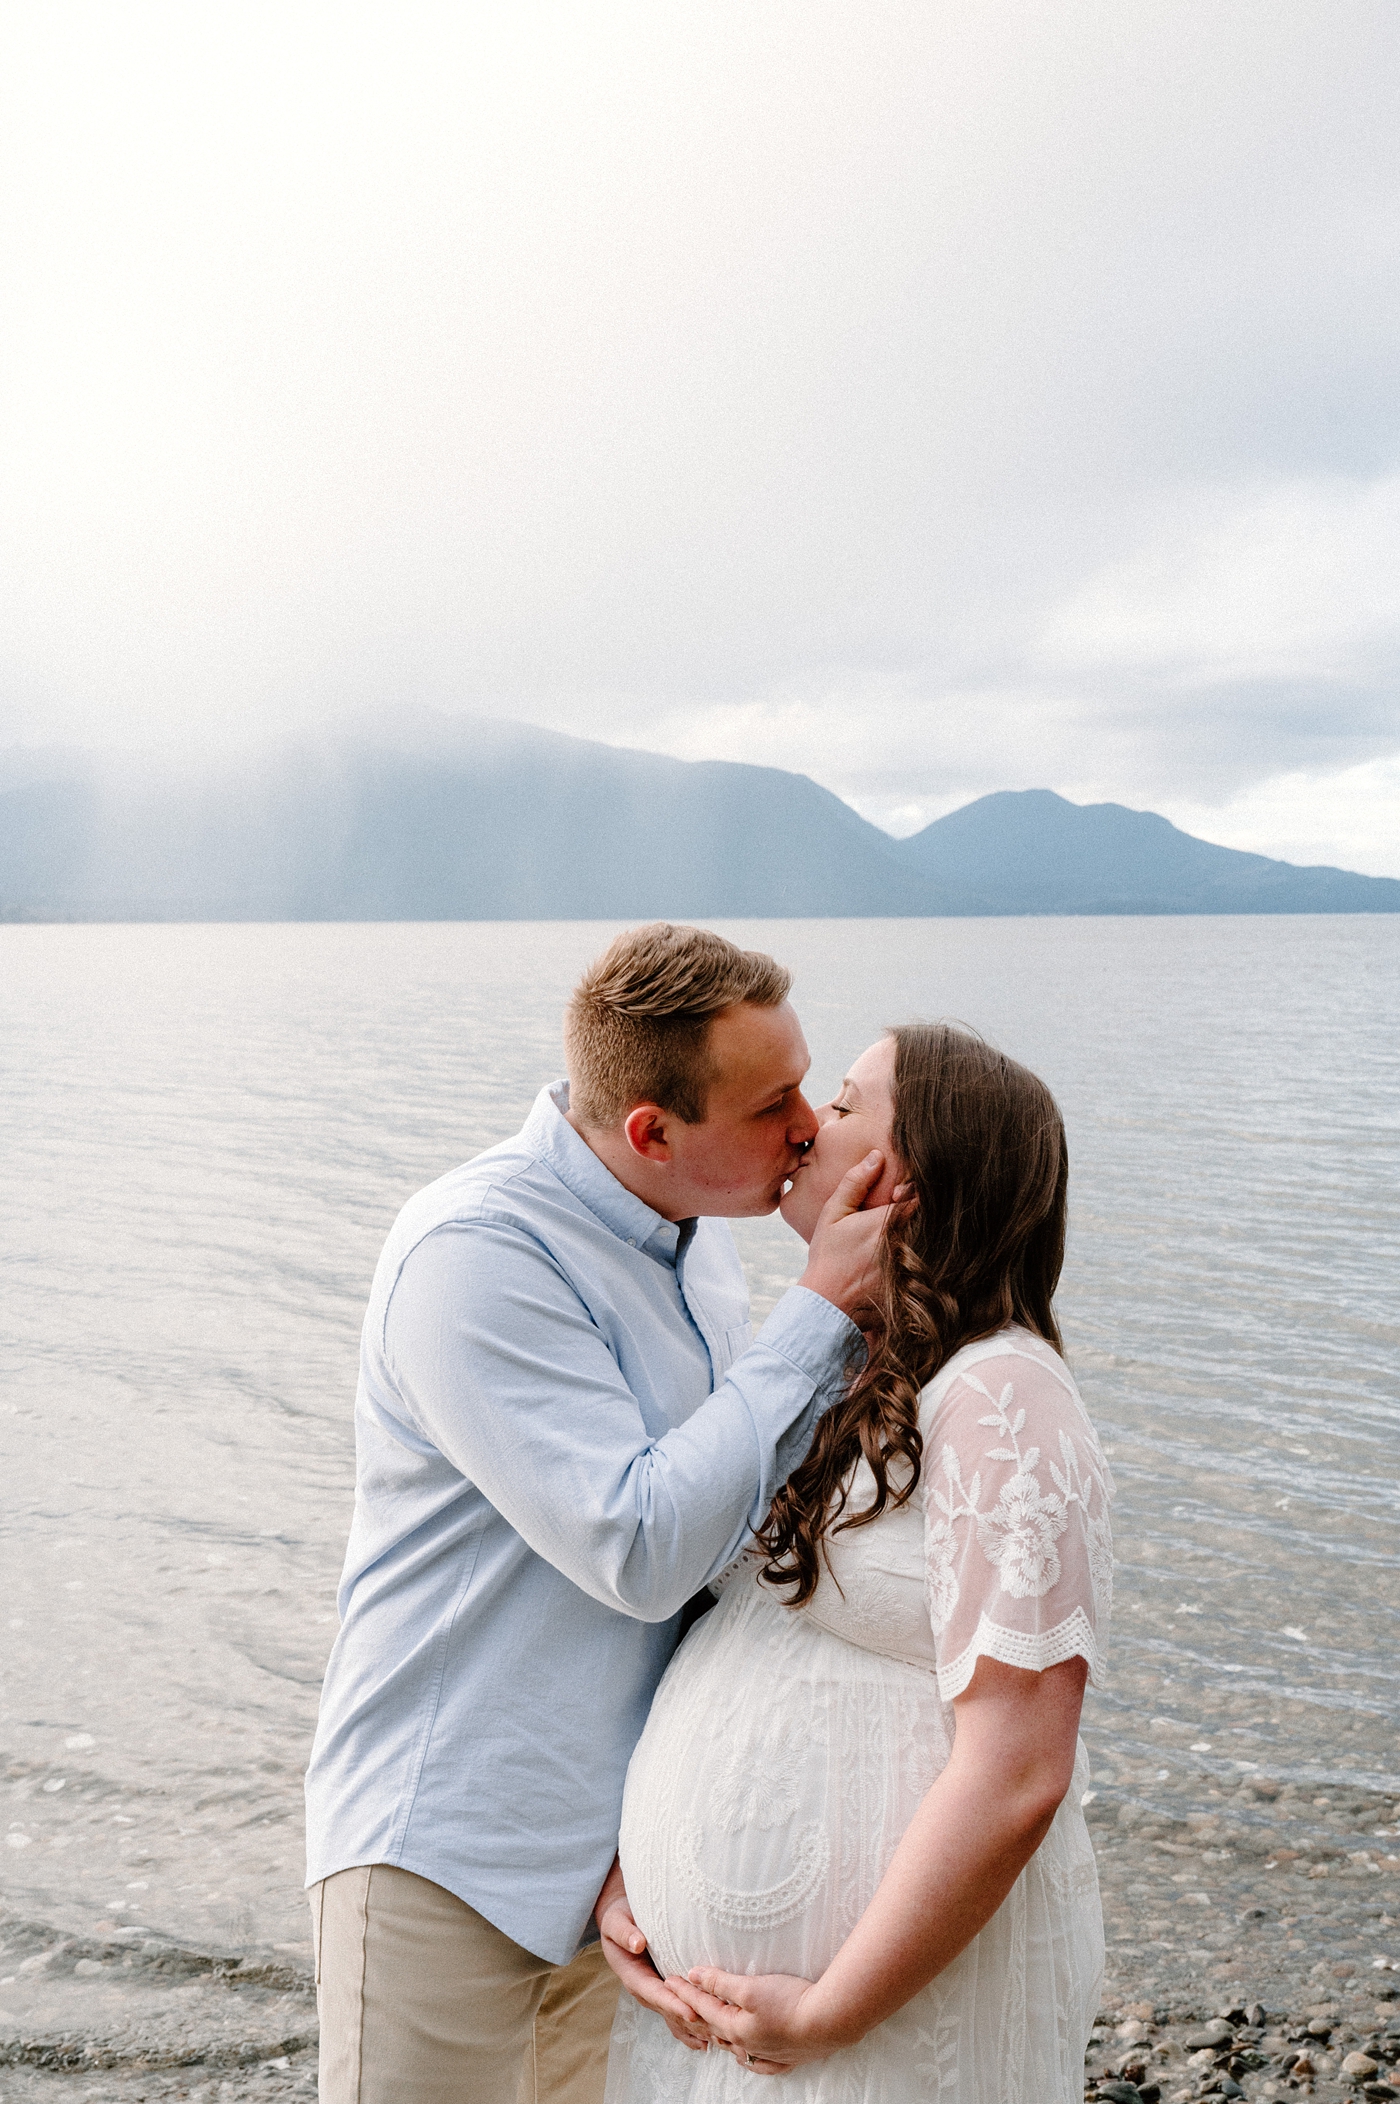 Dad goes in for a kiss during Gig Harbor maternity session. Photo by Meg Newton Photography.